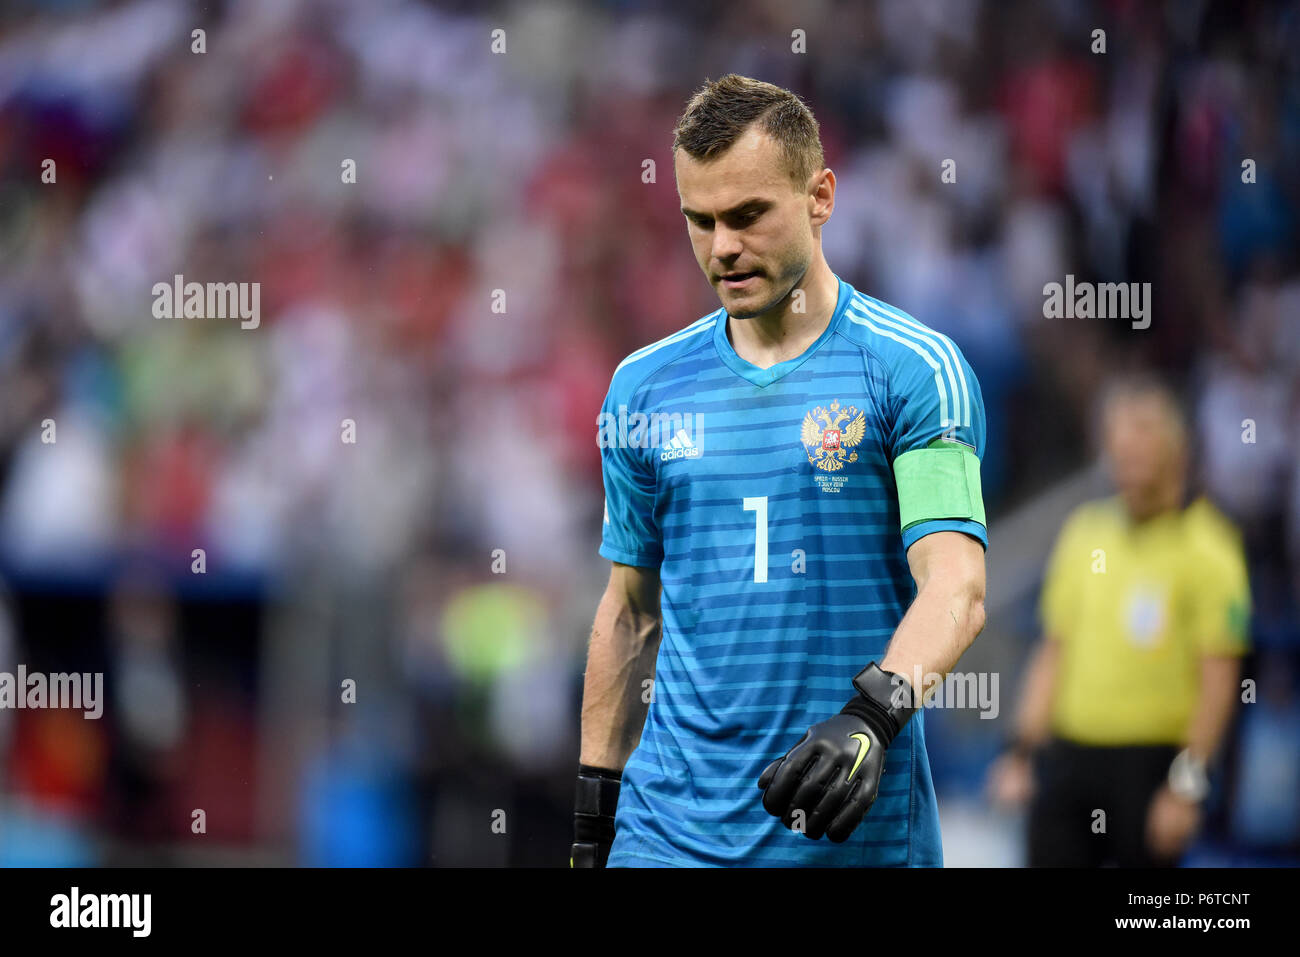 Moscow, Russia - July 1, 2018. Russian national football team goalkeeper Igor Akinfeev during penalty shootout in FIFA World Cup 2018 Round of 16 matc Stock Photo